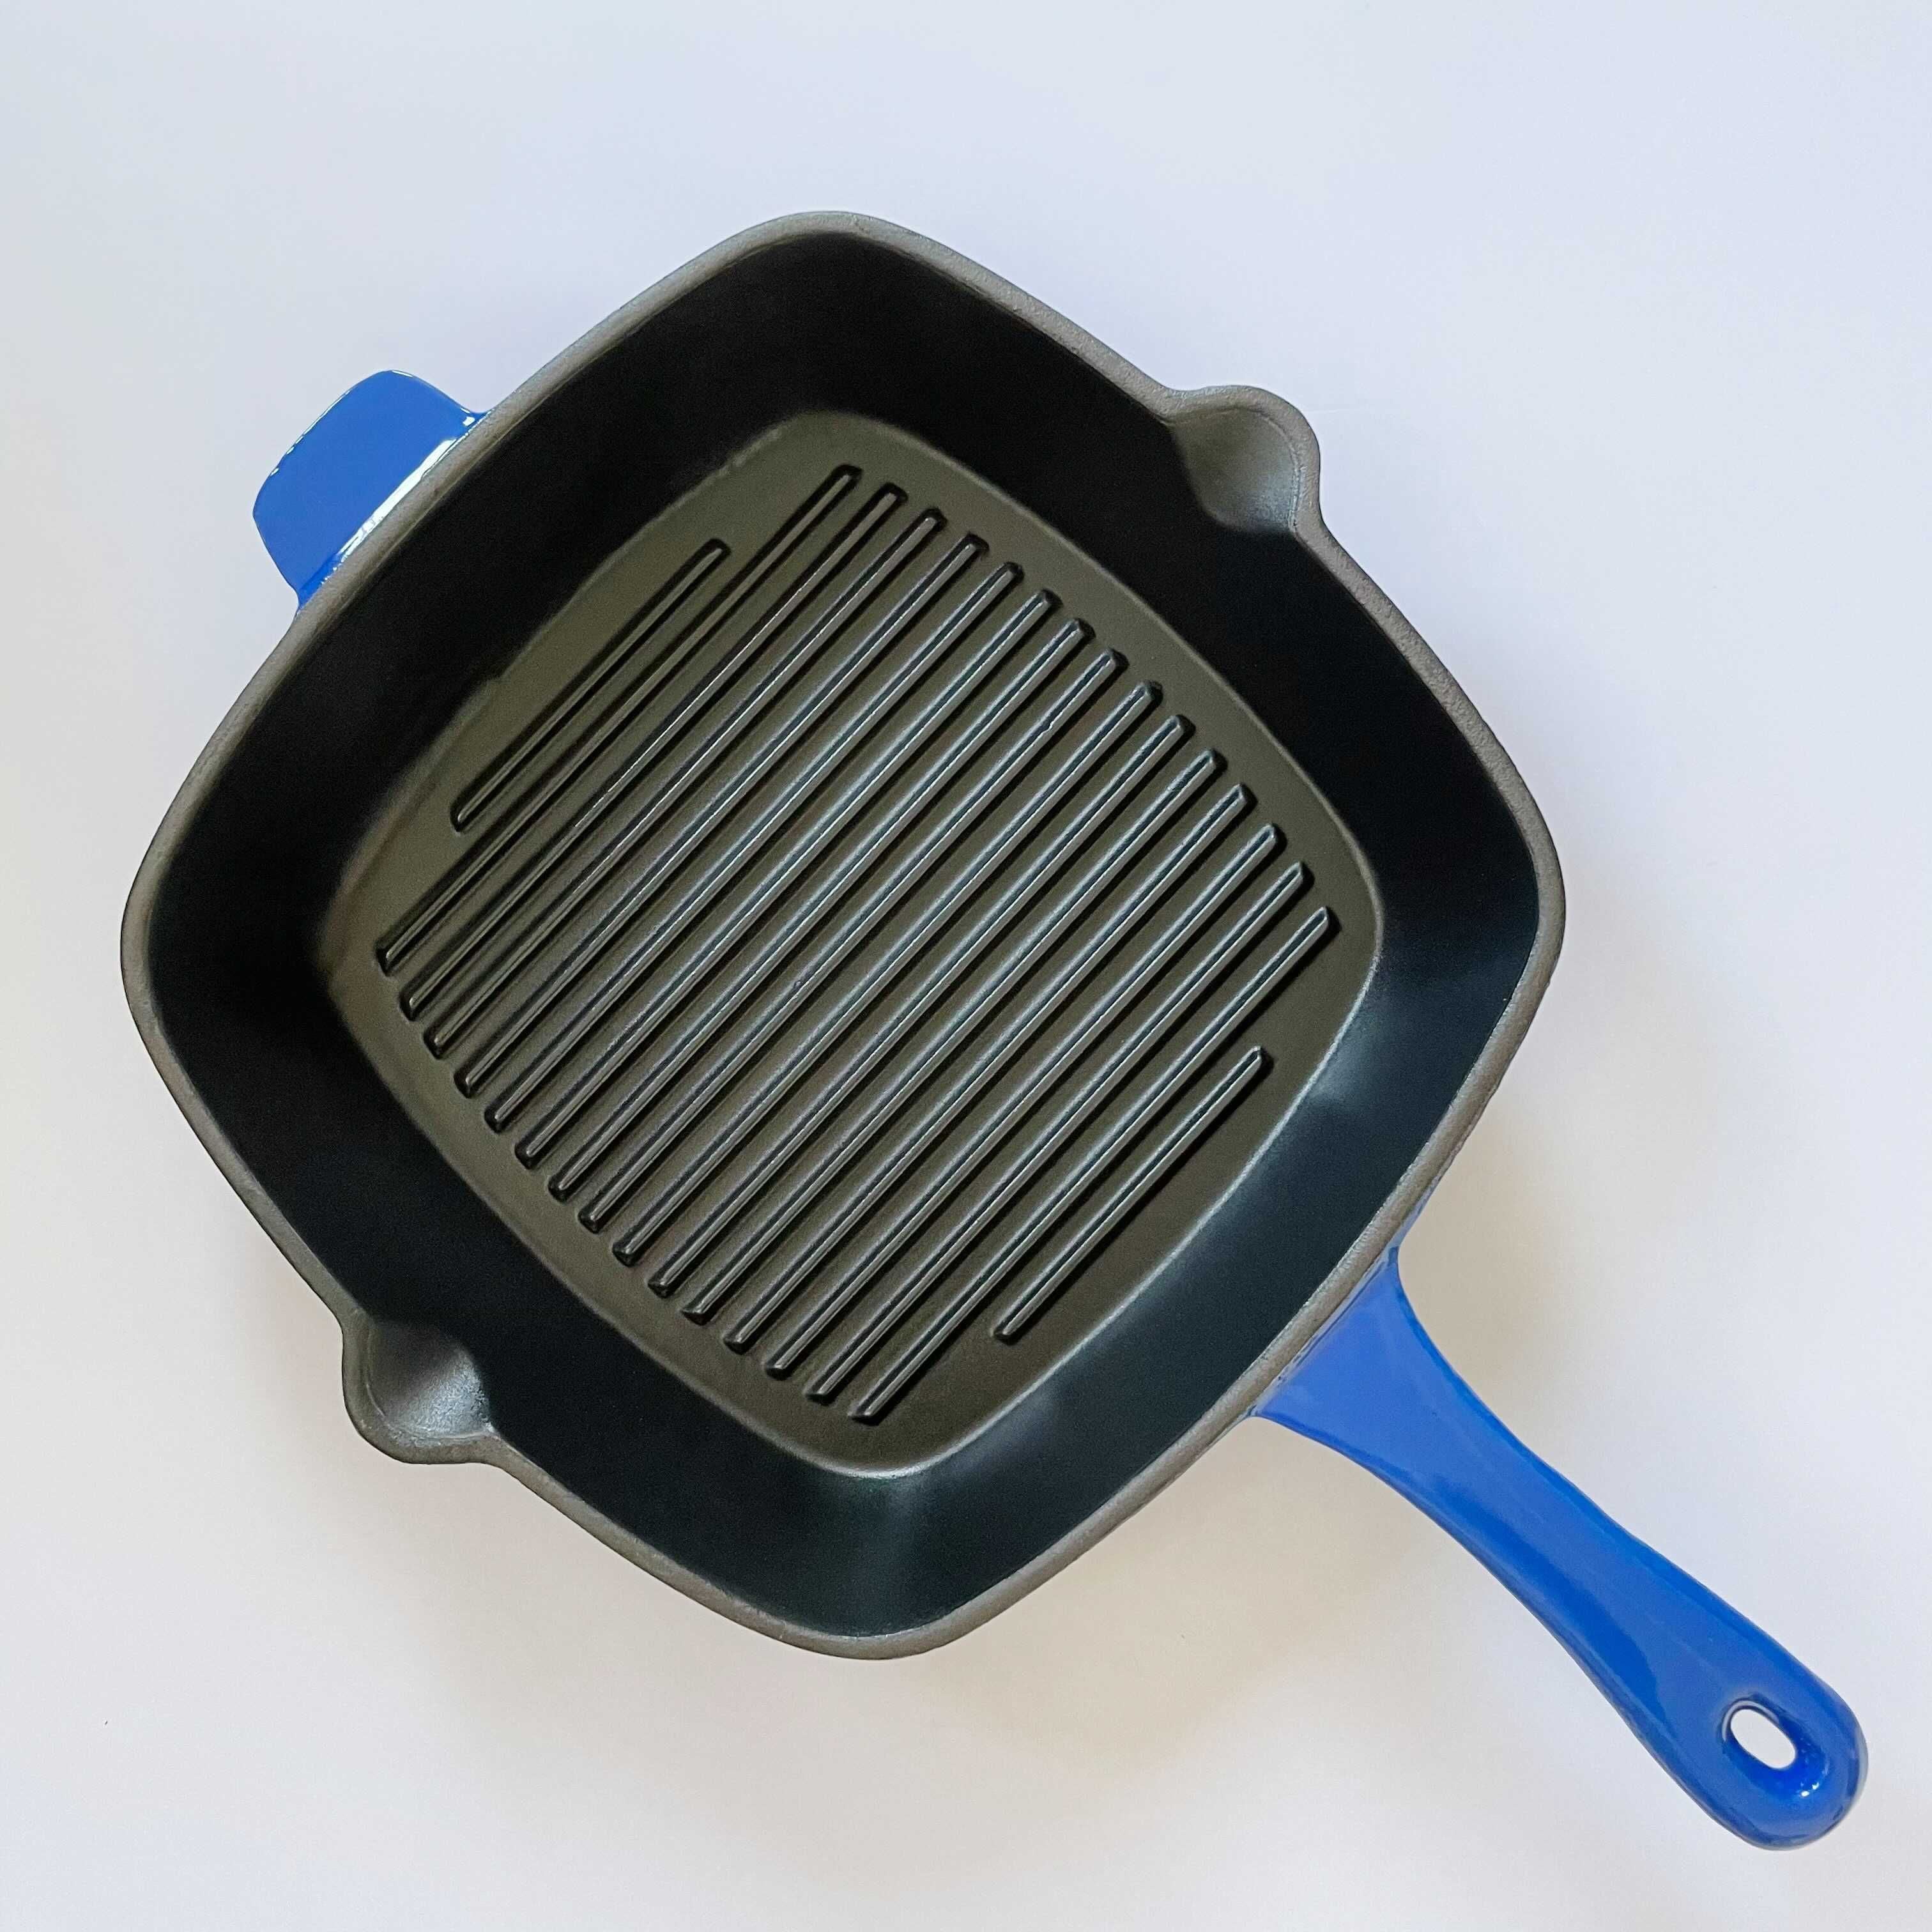 Review: Griddle Pan by Jean-Patrique – Brighter Shade of Green